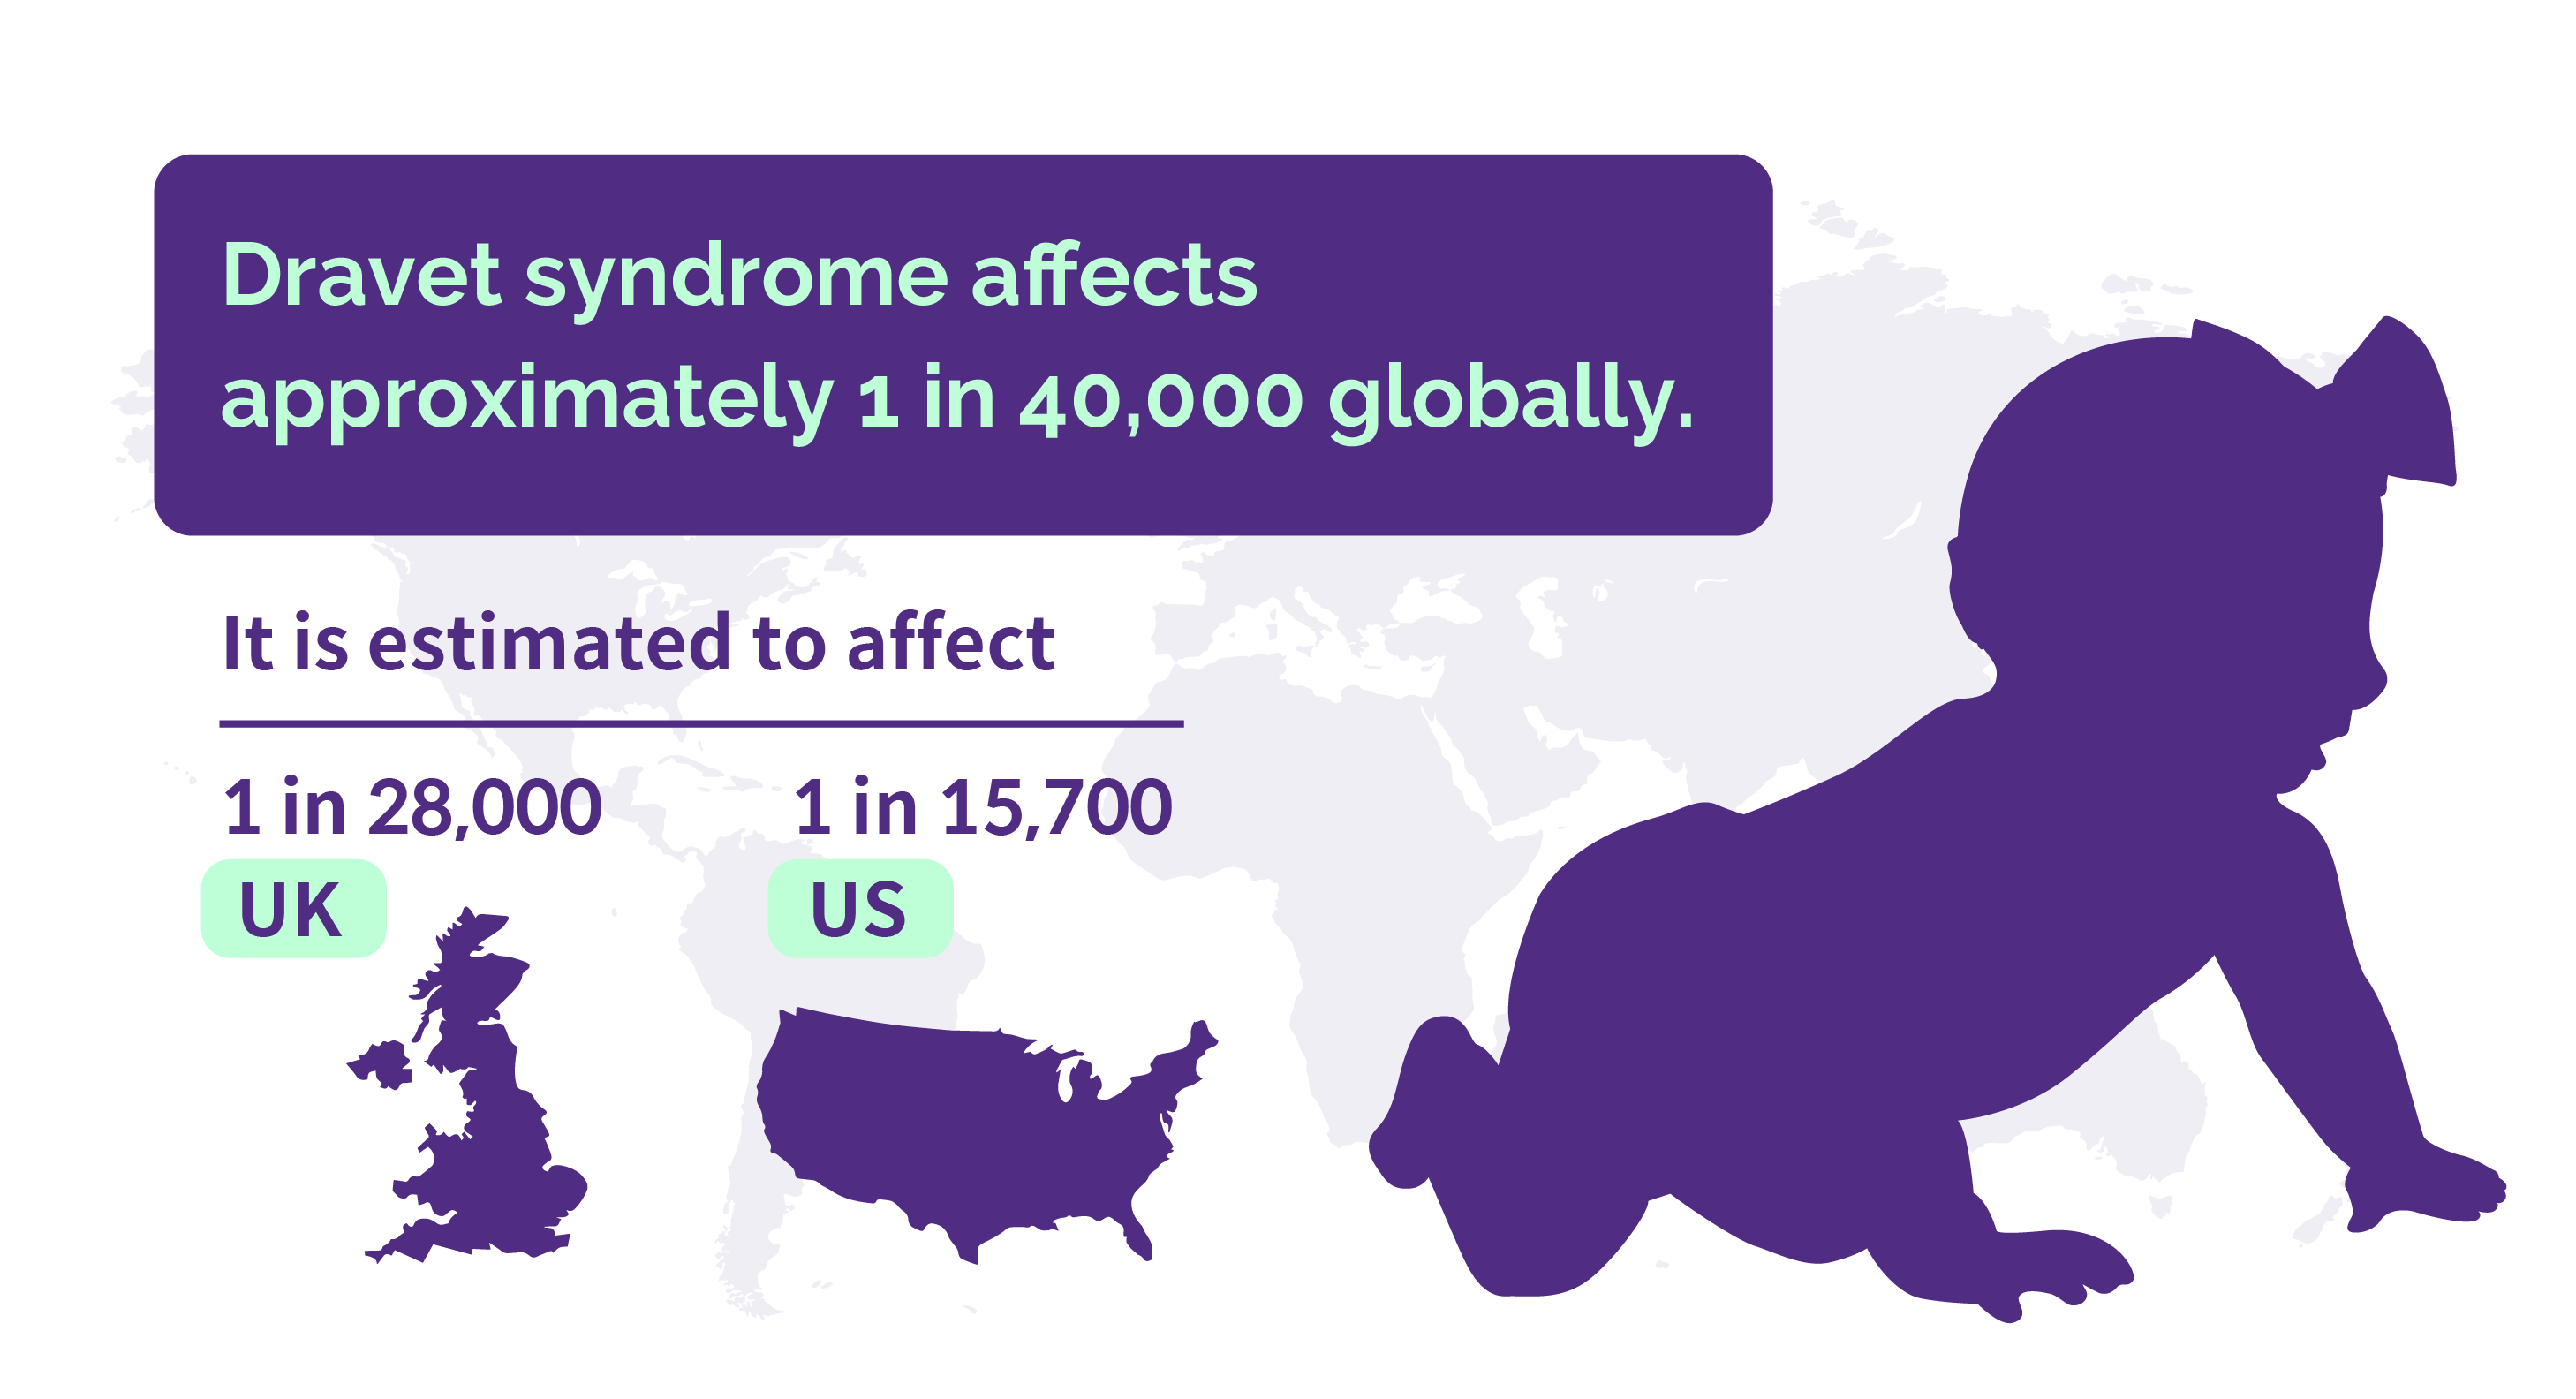 Map background and words showing Dravet syndrome's global prevalence and national prevalence of the UK and the US